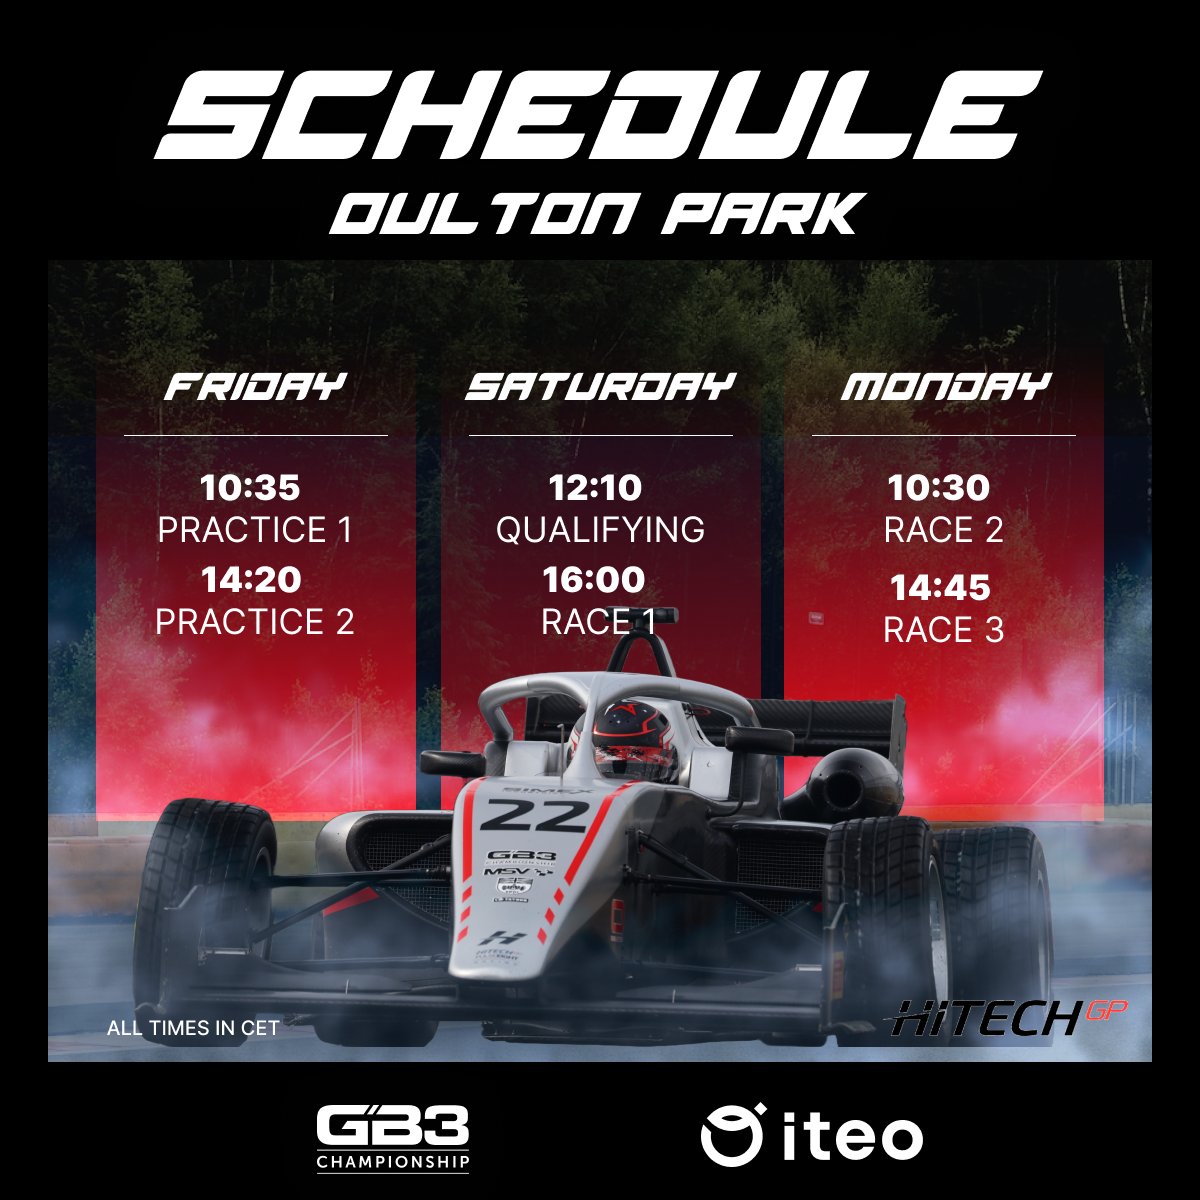 It's Friday theeen, Saturday... and Monday! Remember the last two races are the day after Easter Sunday 🐣 📲 Save this schedule. @iteo_apps @HitechGP @GB3Championship #GB3 #viaF1